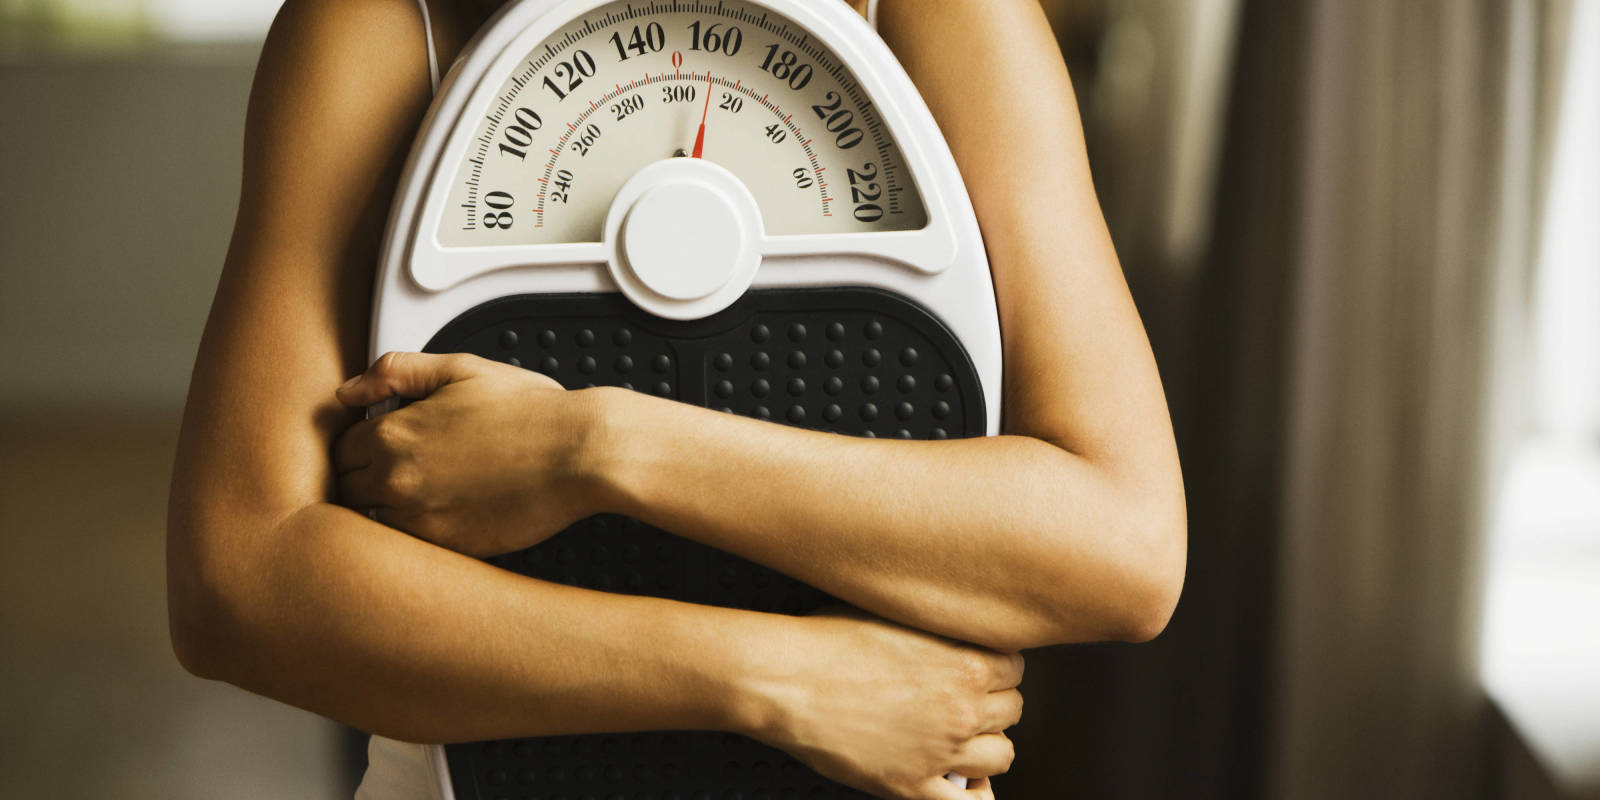 Women Struggle To Lose Weight: Here's Why